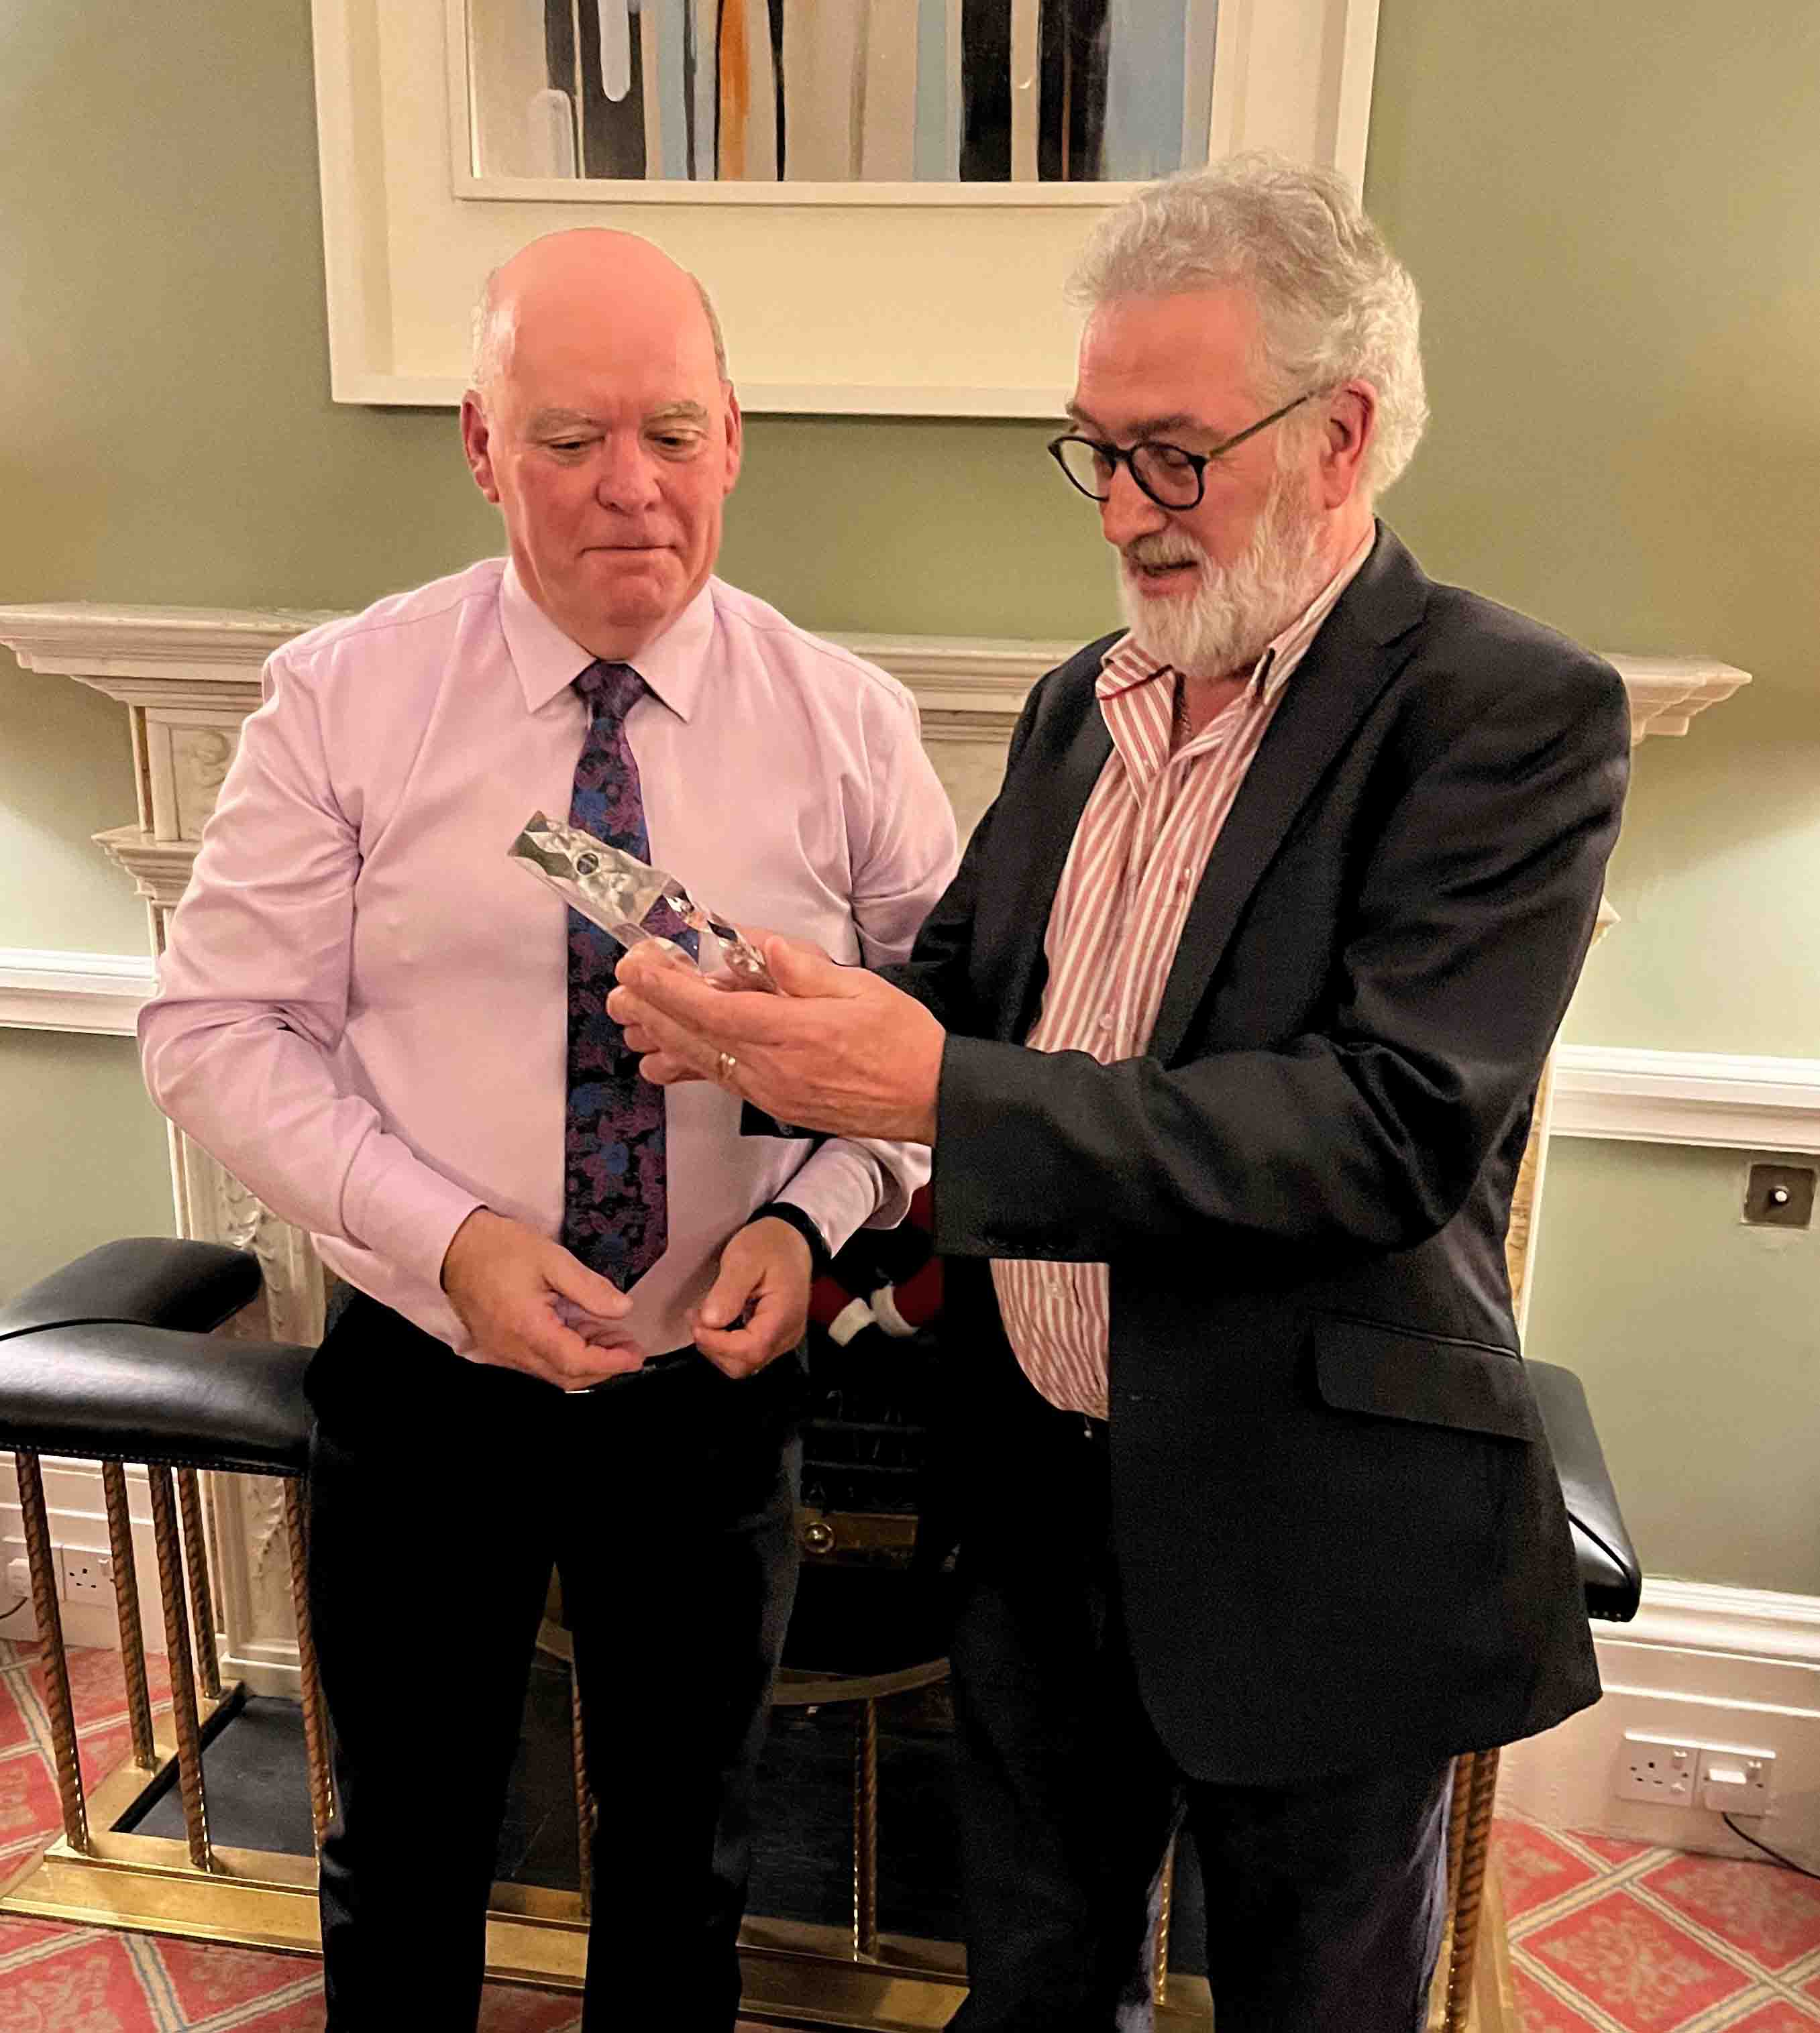 Dean Field receives his gift for long service from the Ven Ricky Rountree.